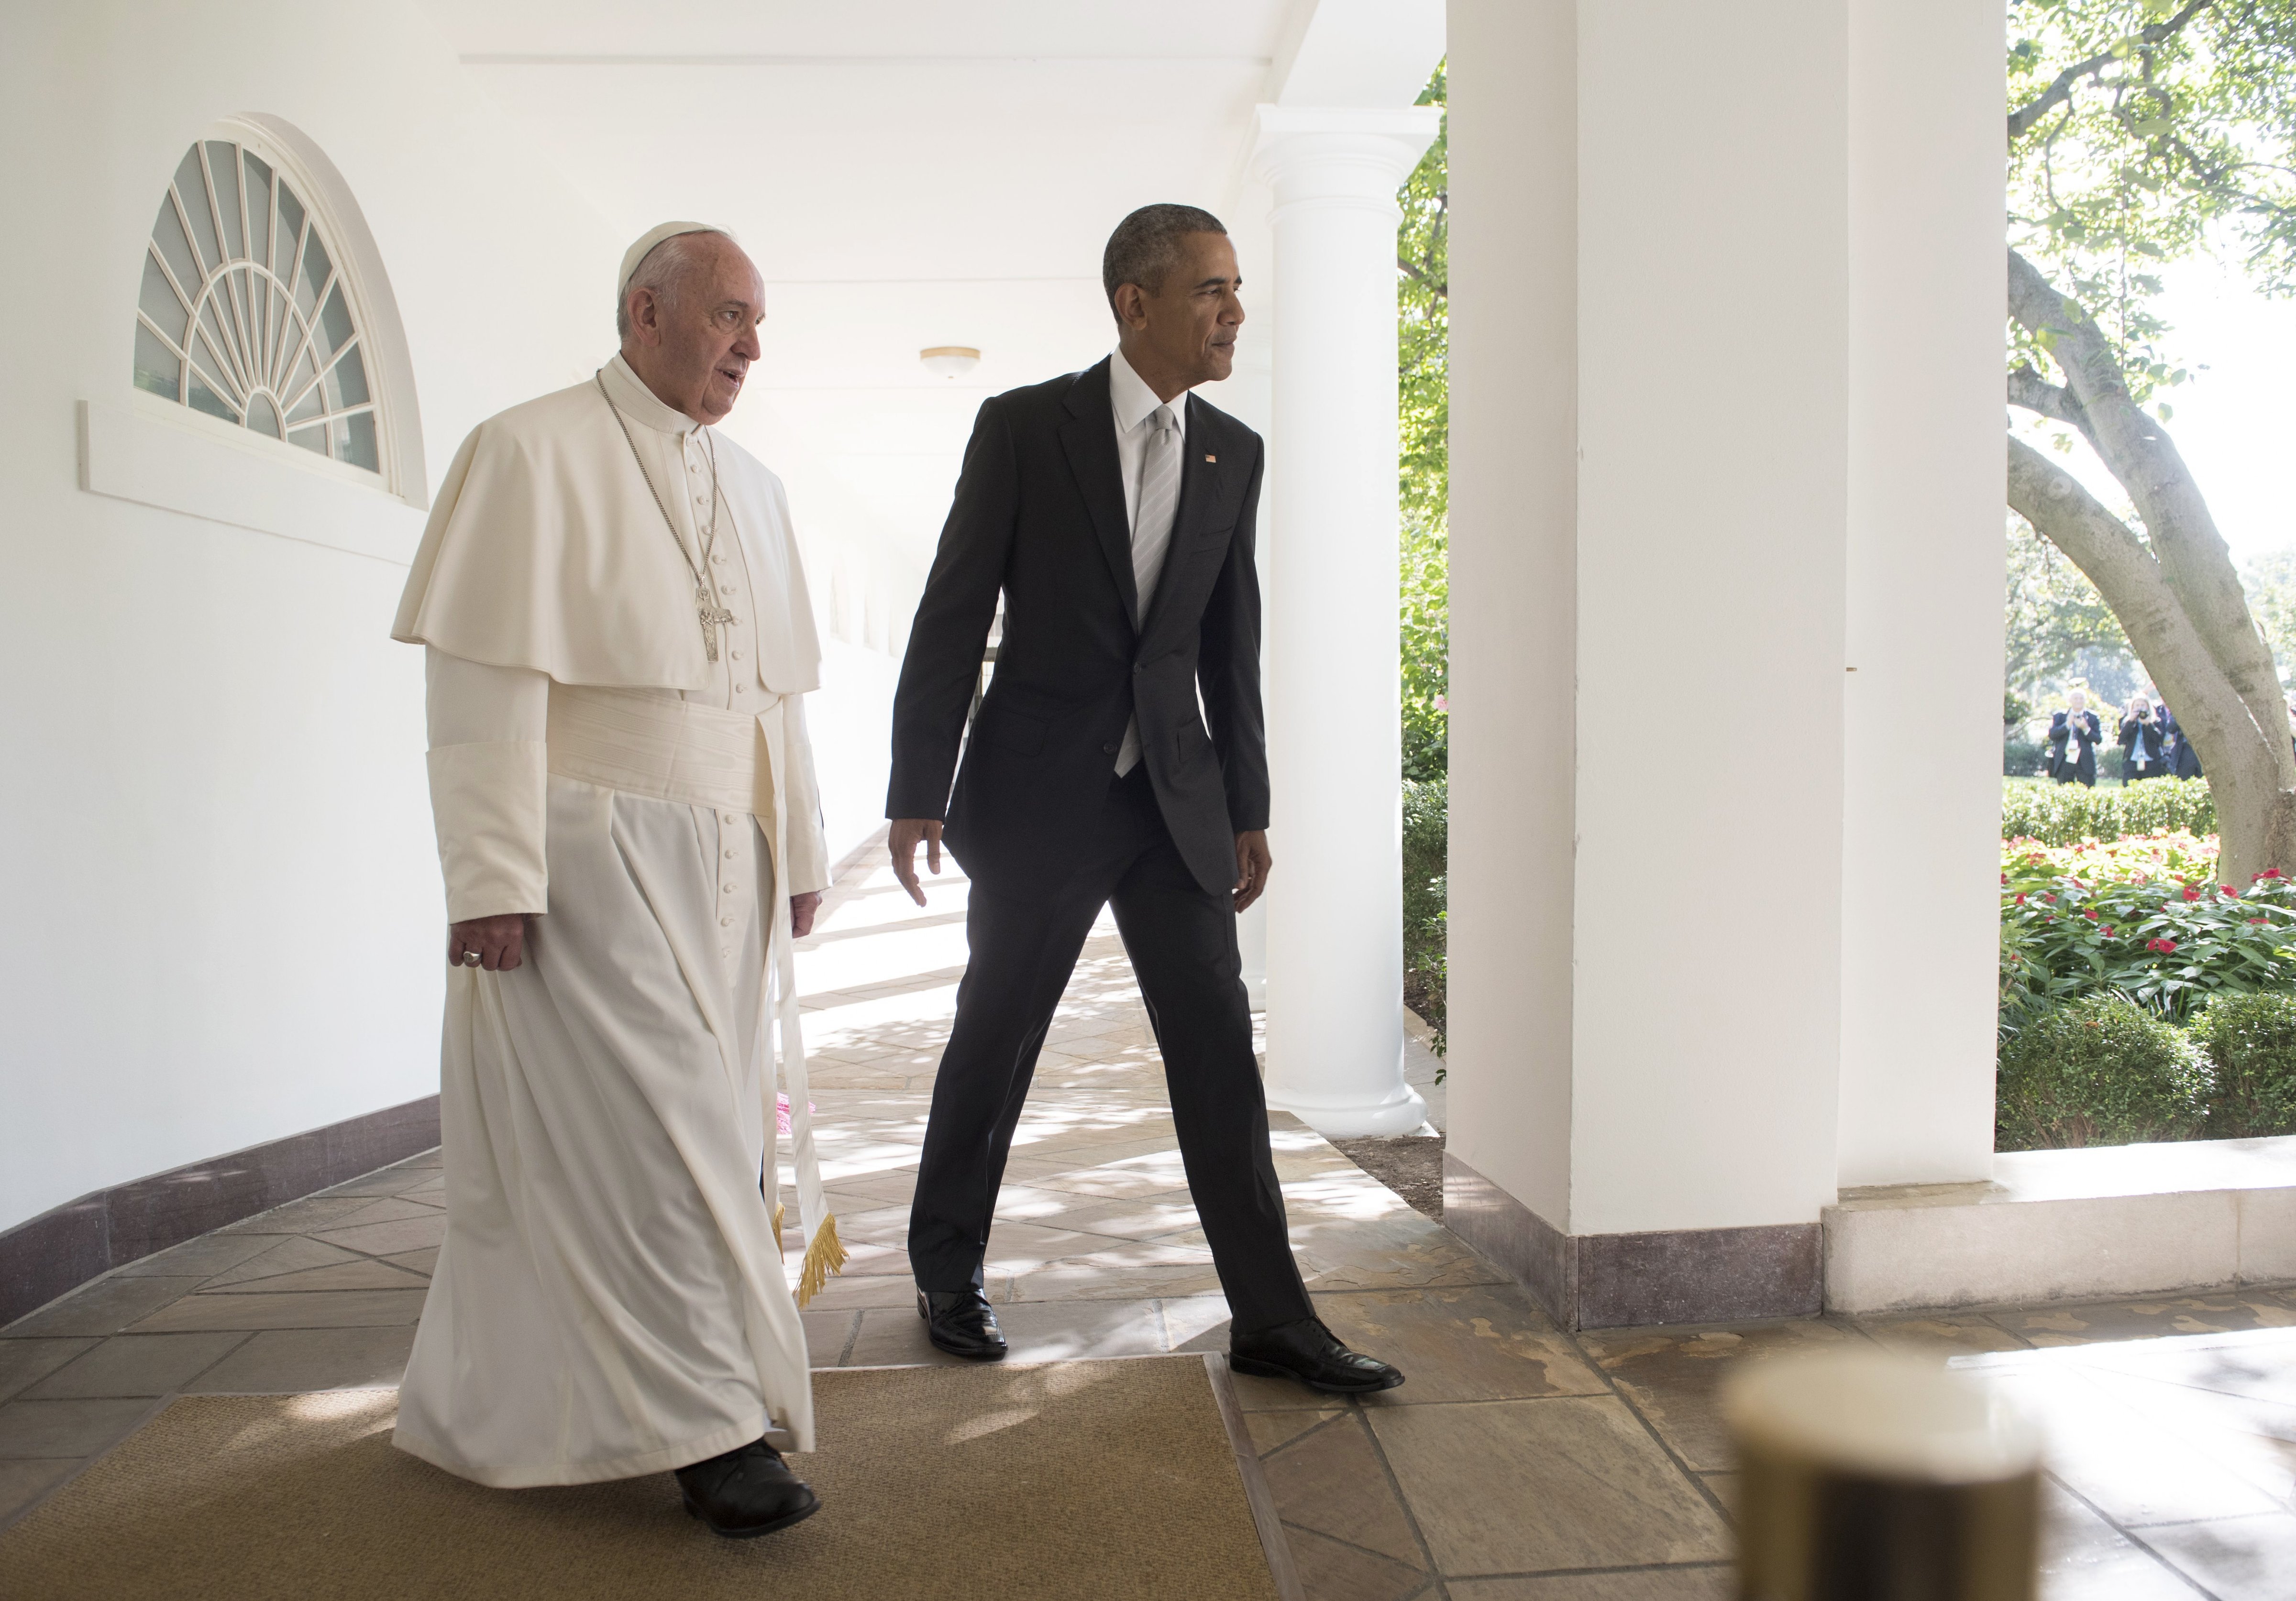 Barack Obama walks with Pope Francis down the West Wing Colonnade to a meeting in the Oval Office of the White House in Washington, DC, on Sept. 23, 2015. (Mandel Ngan—AFP/Getty Images)